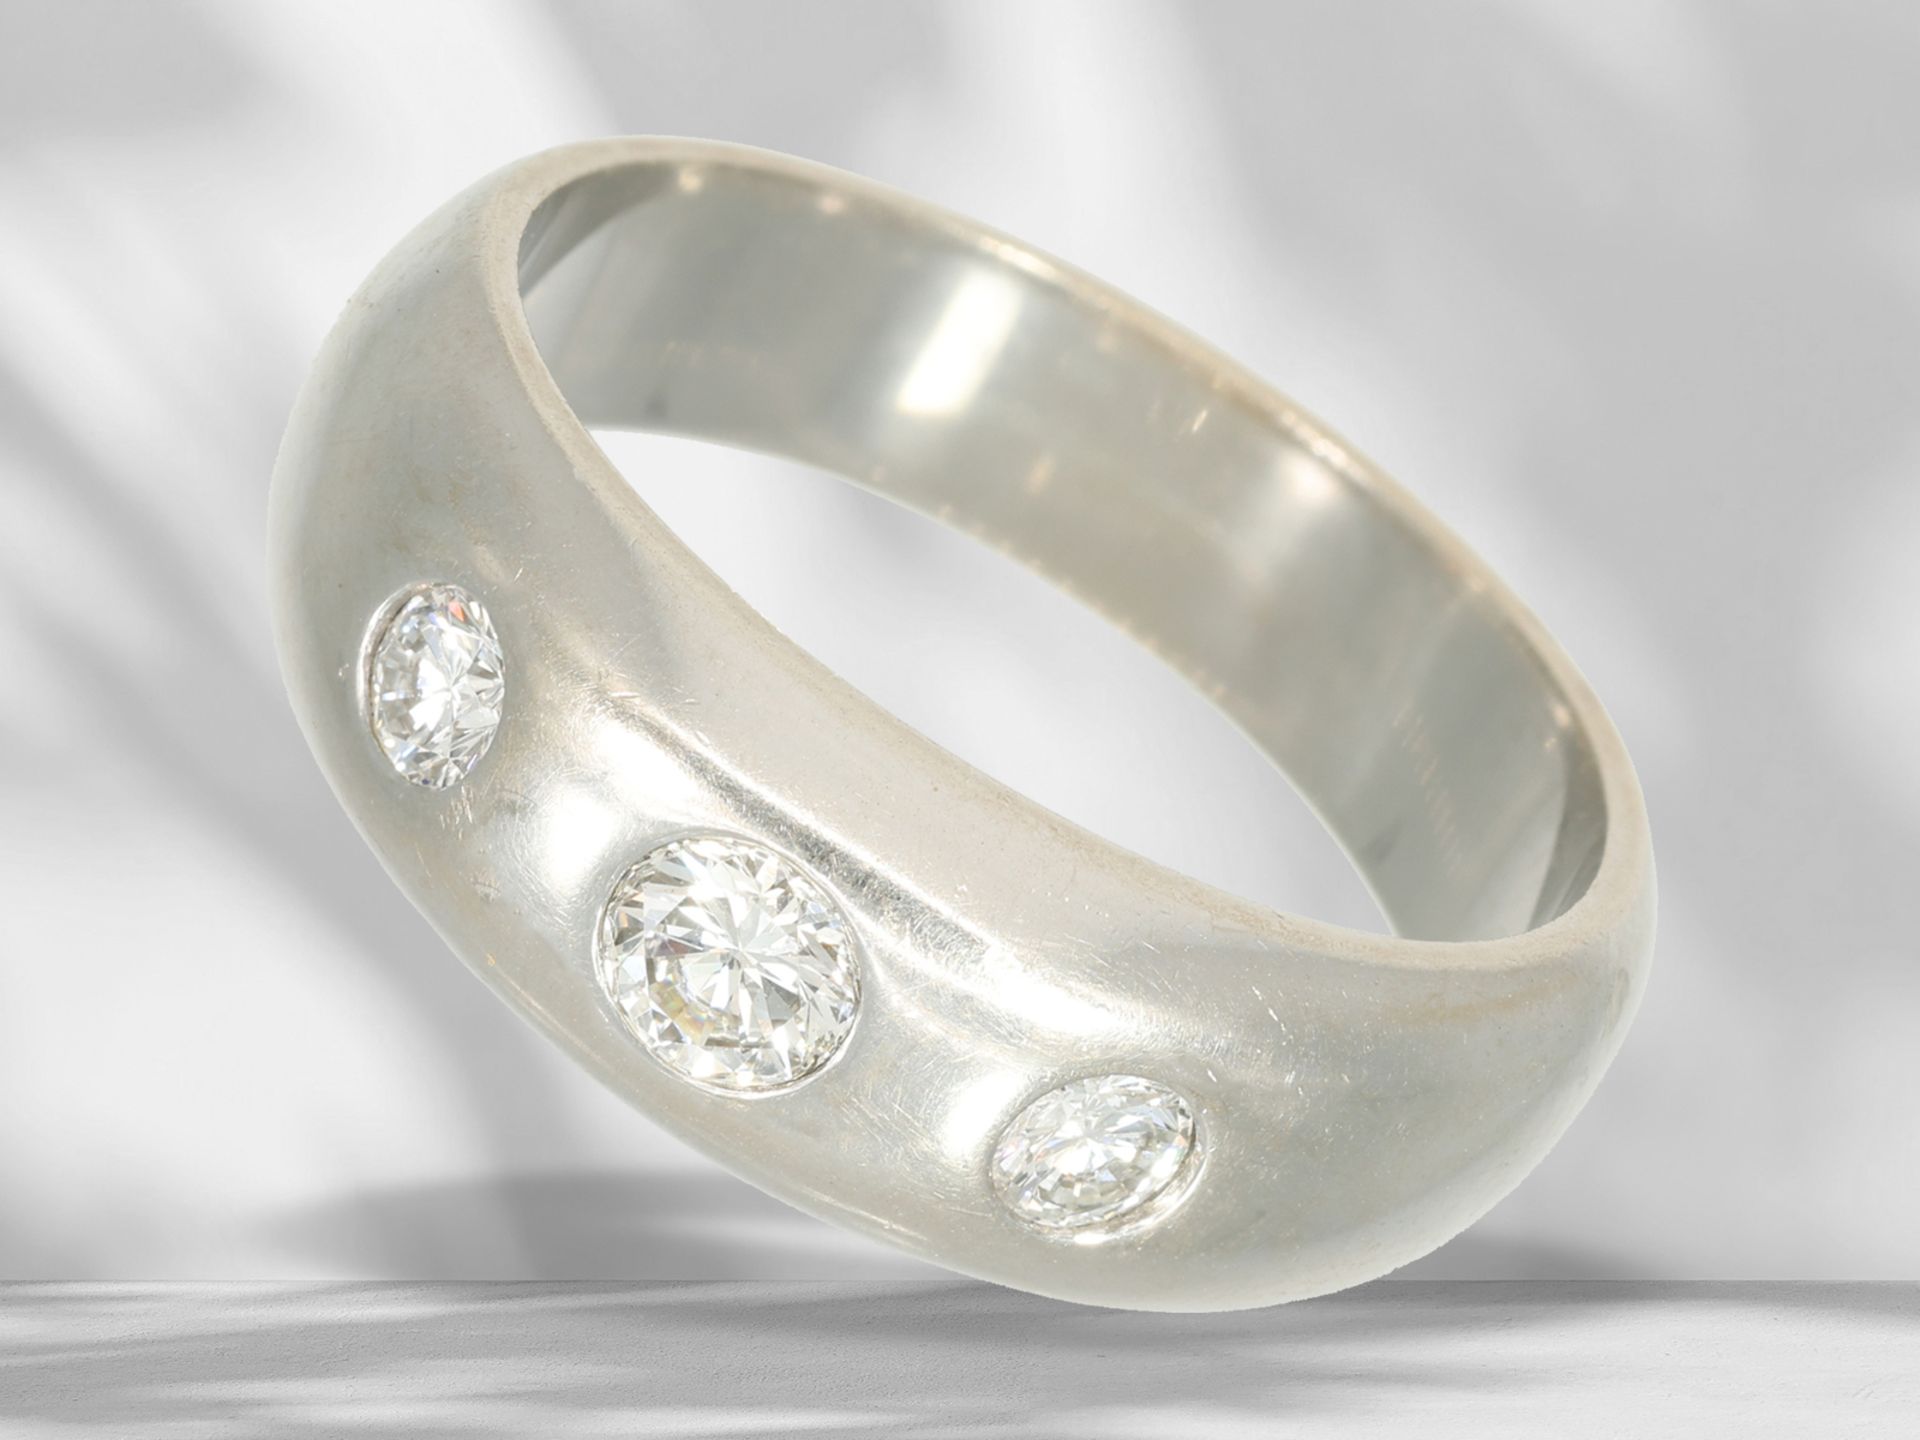 Ring: white gold, very solidly crafted band ring set with brilliant-cut diamonds, approx. 0.62ct